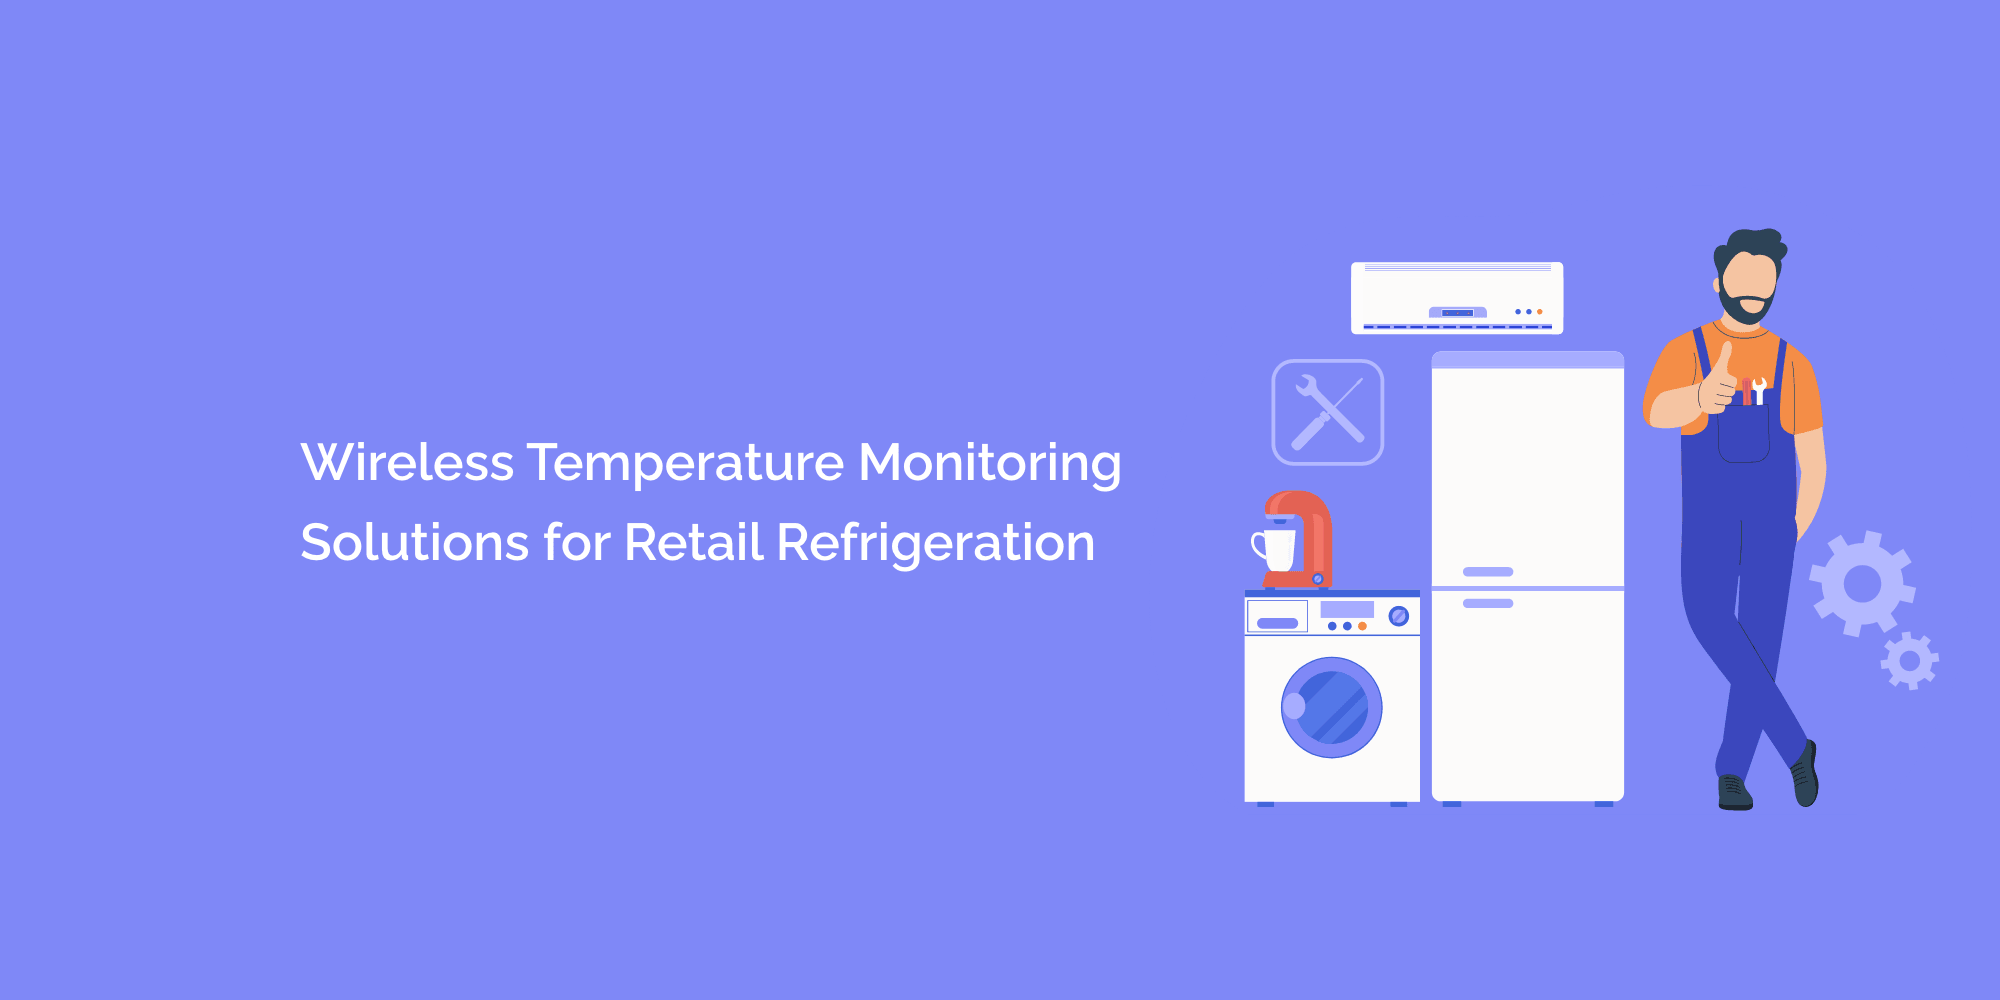 Wireless Temperature Monitoring Solutions for Retail Refrigeration